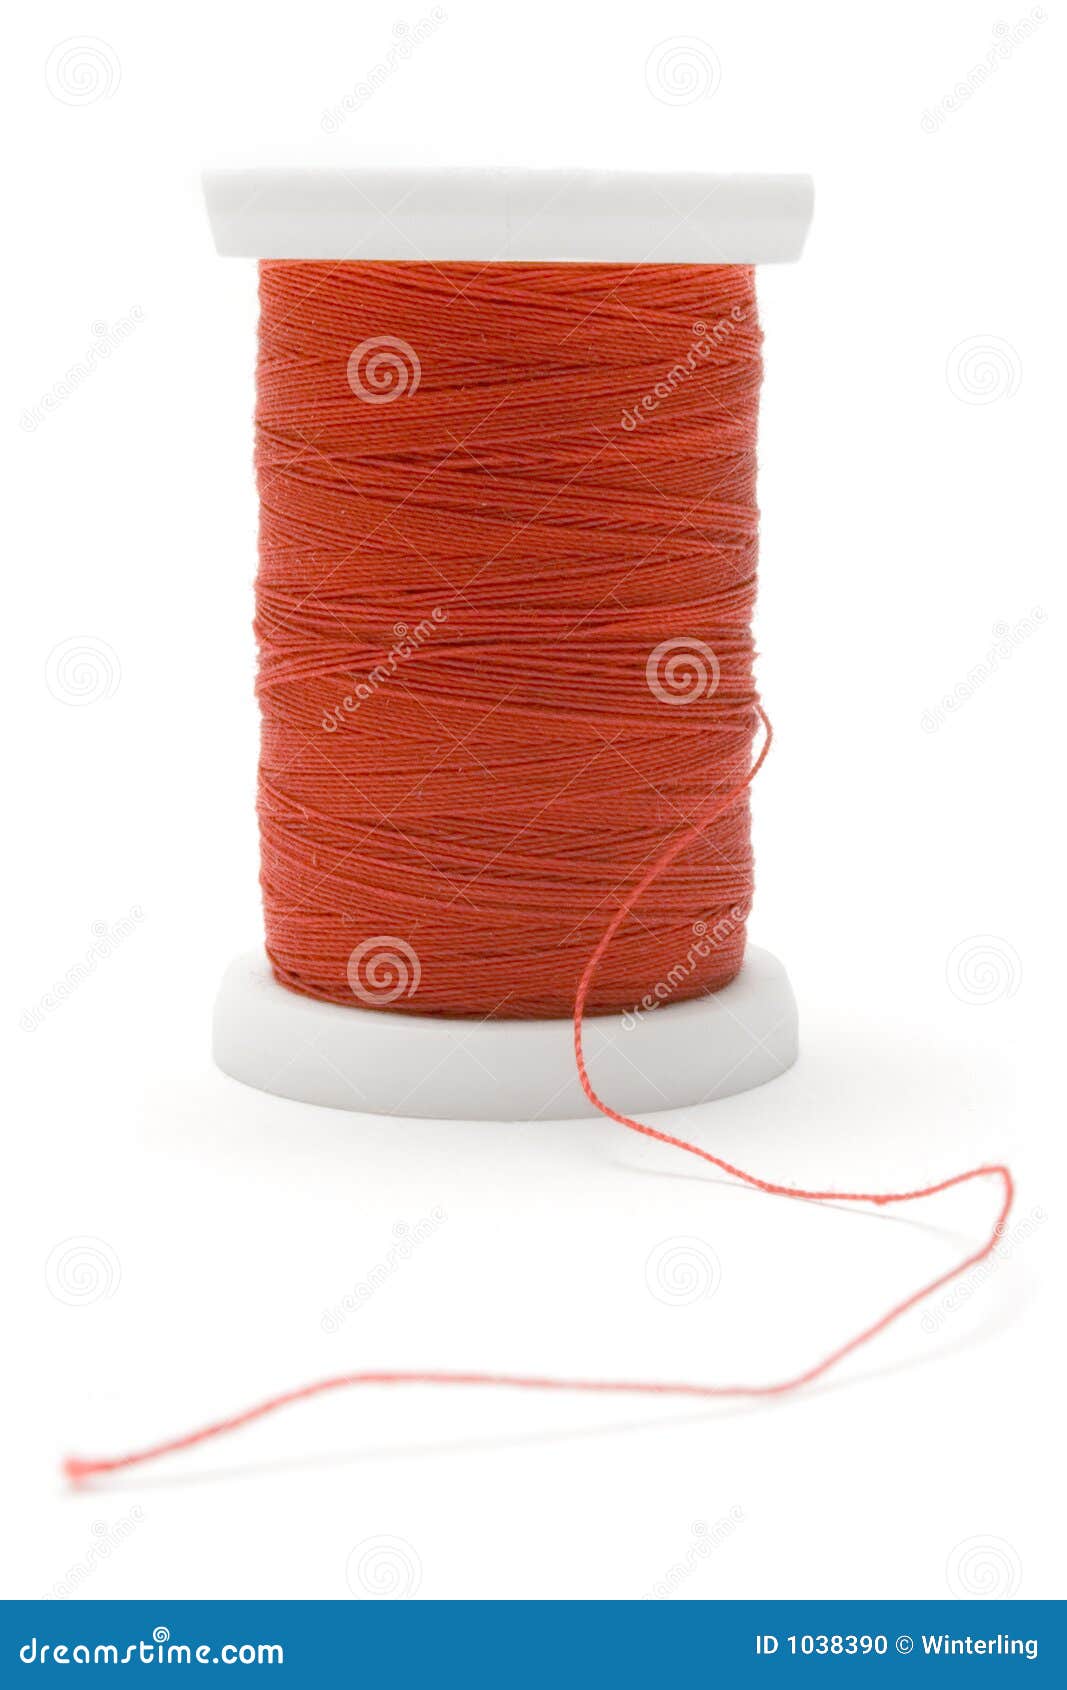 Vibrant Red Thread Isolated on White